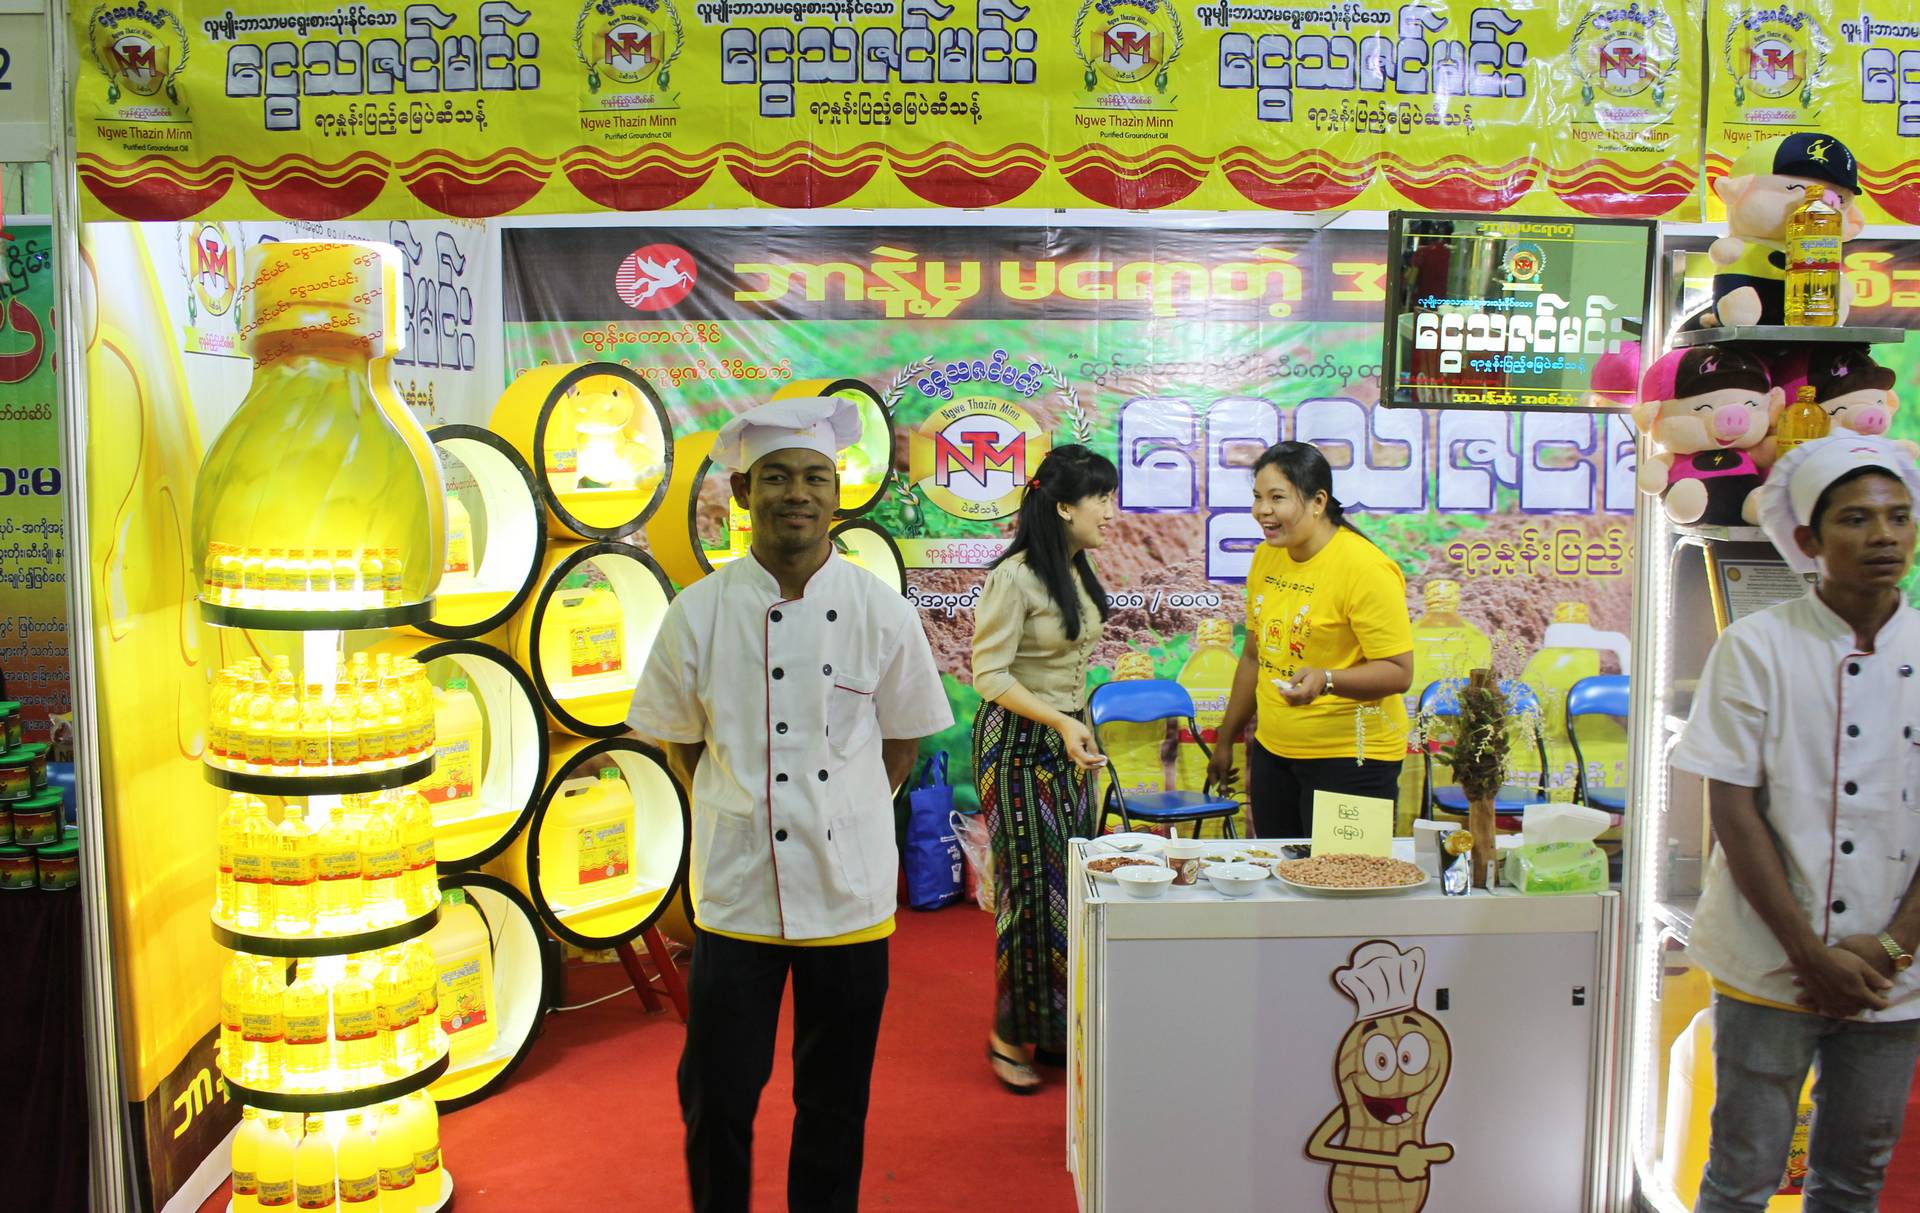 A peanut oil stall at the Myanmar Food & Drink Expo on Feb. 4, 2018.